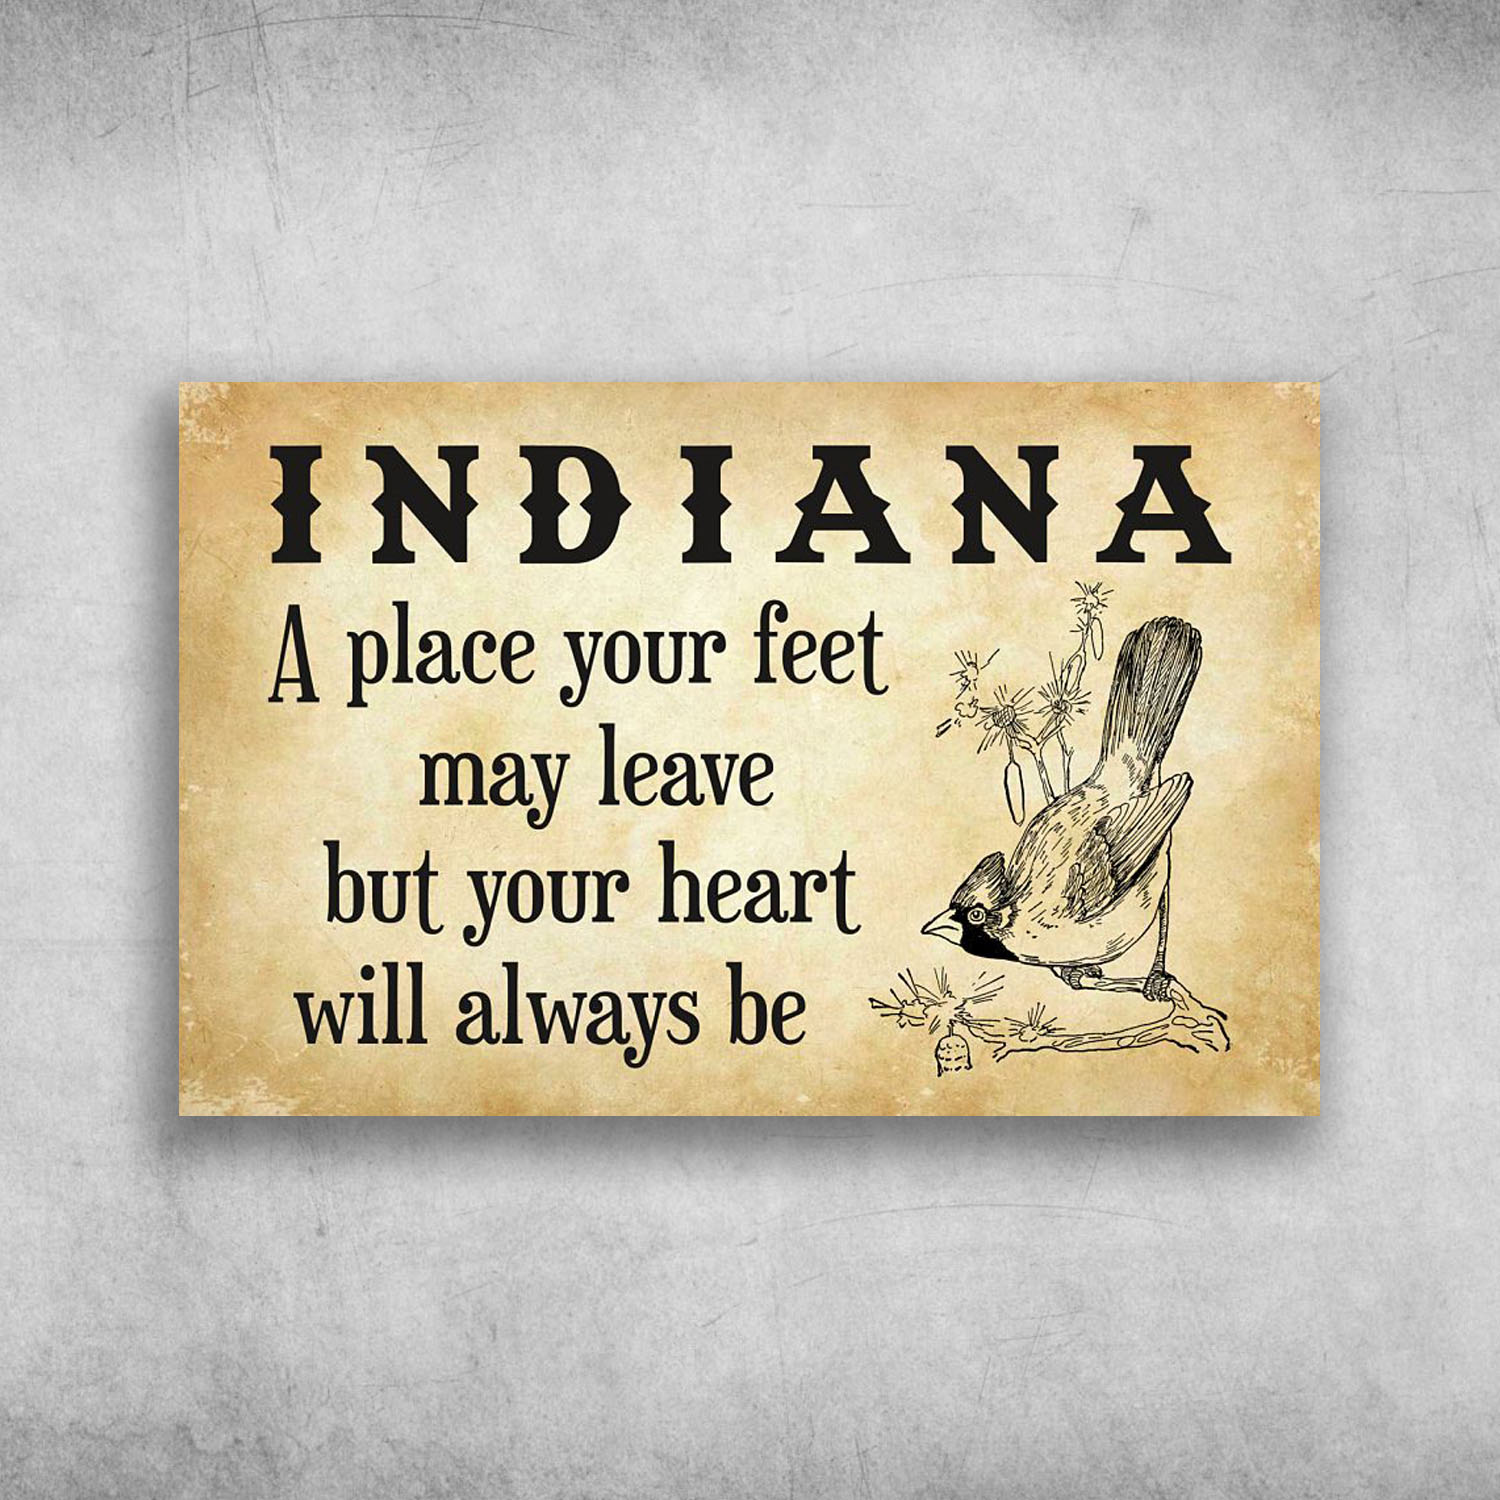 Indiana A Place Your Feet May Leave